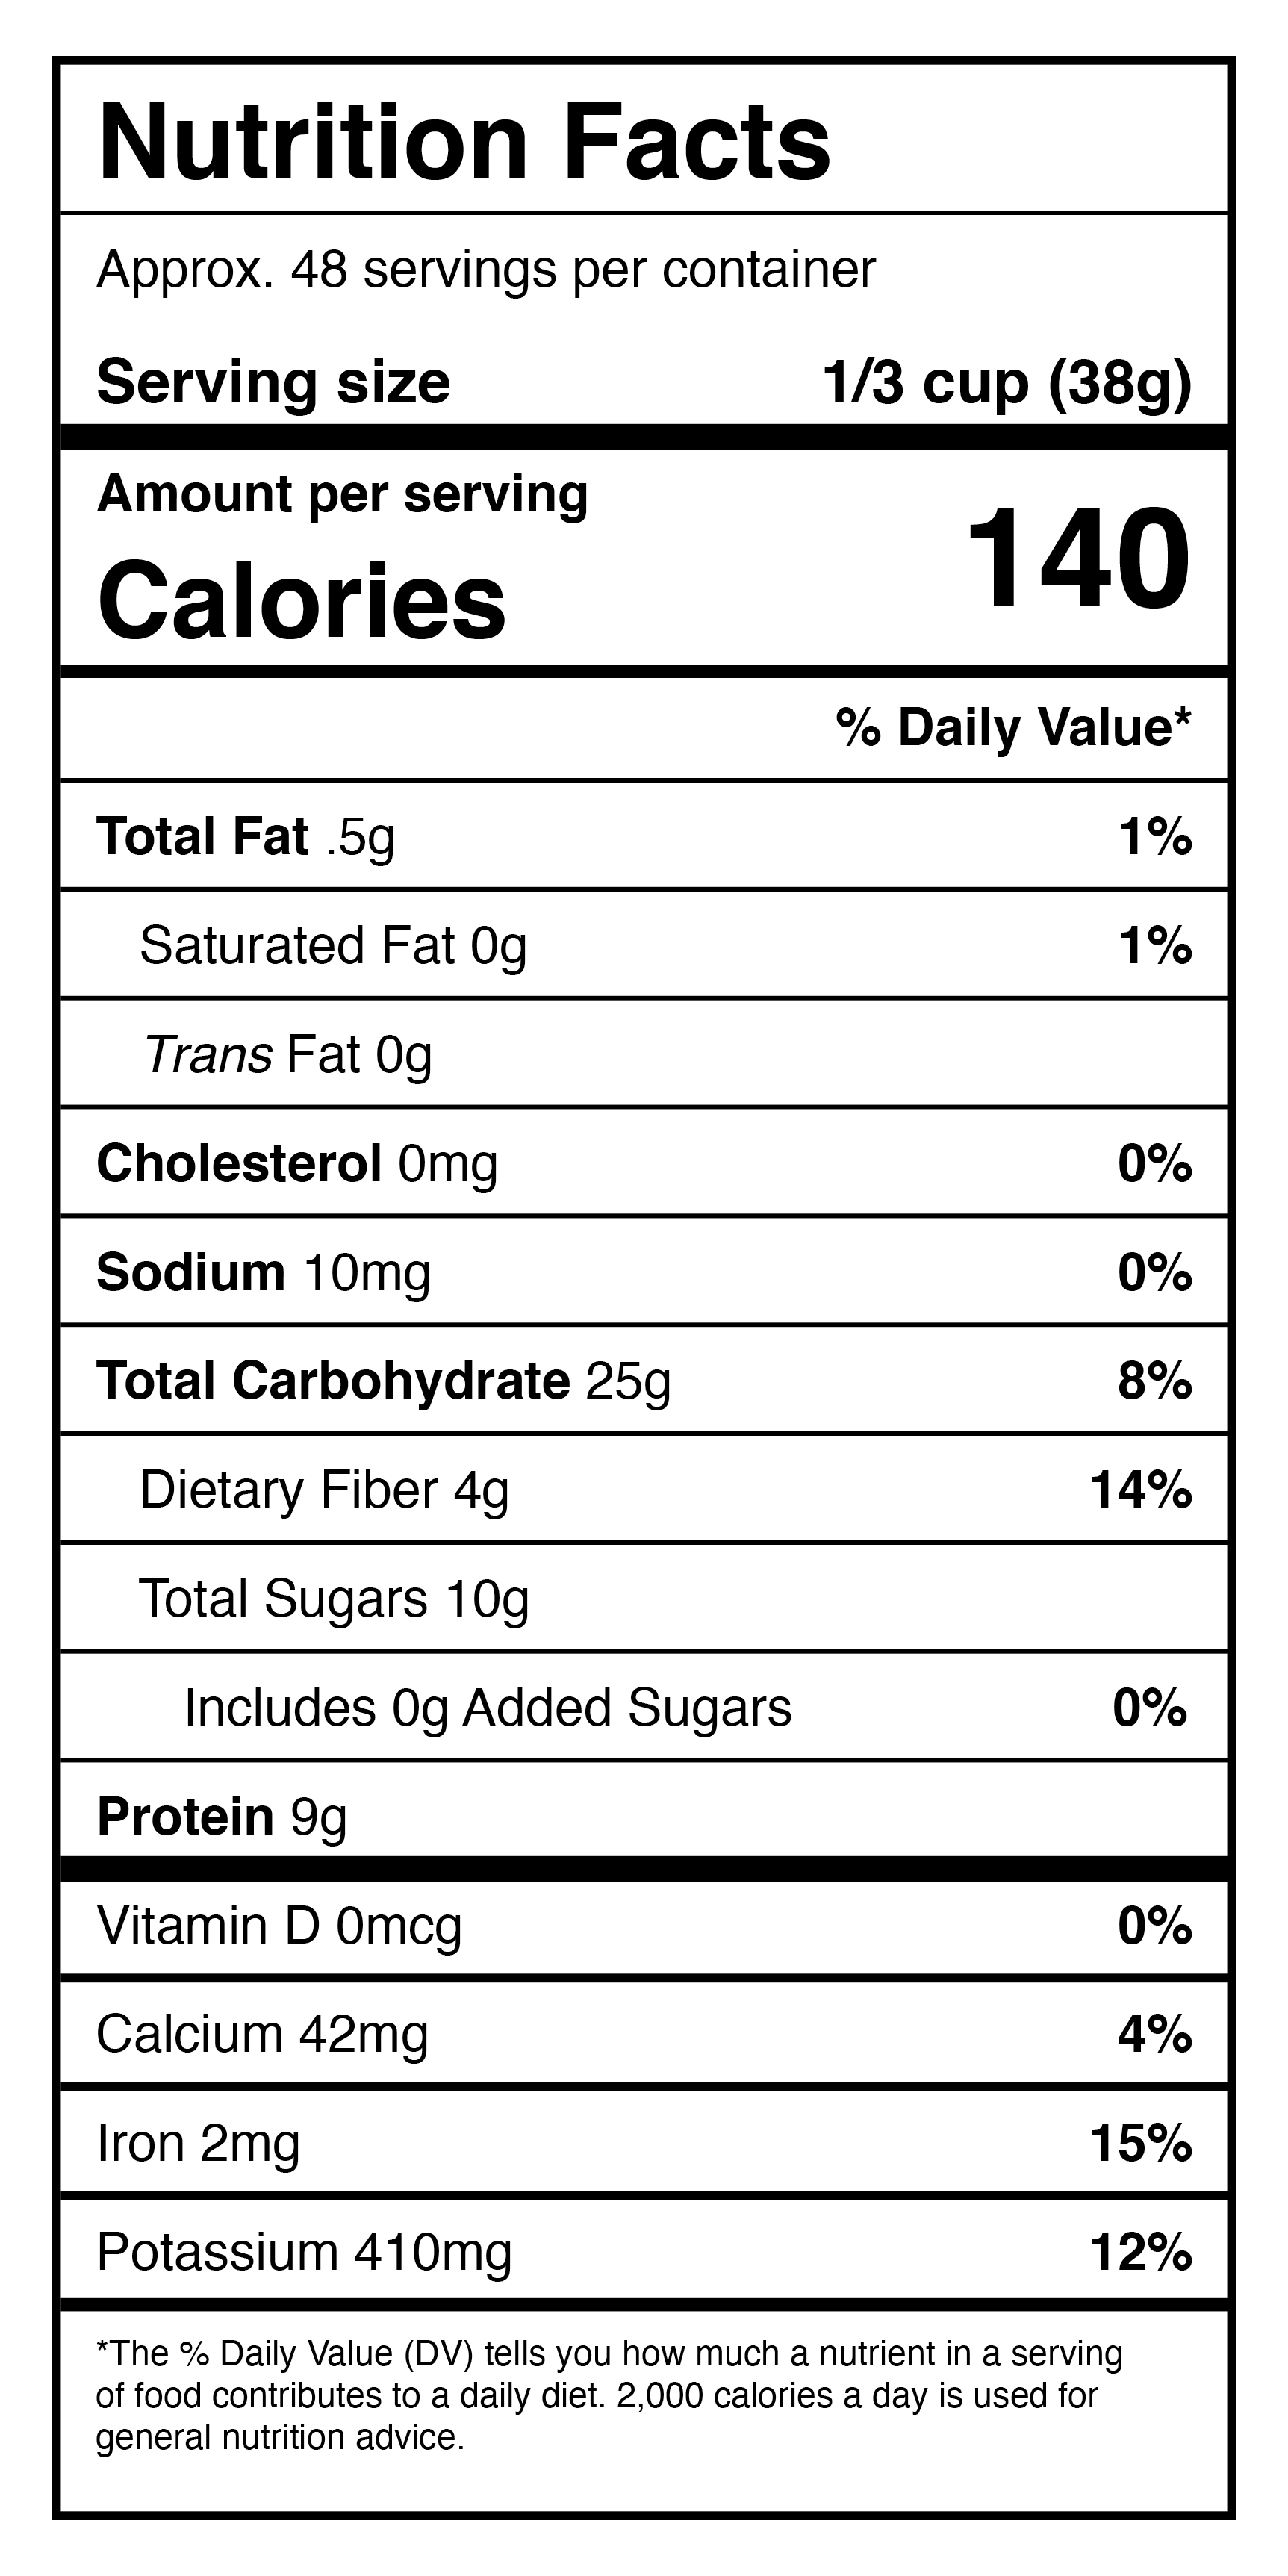 A nutrition label for a protein powder.